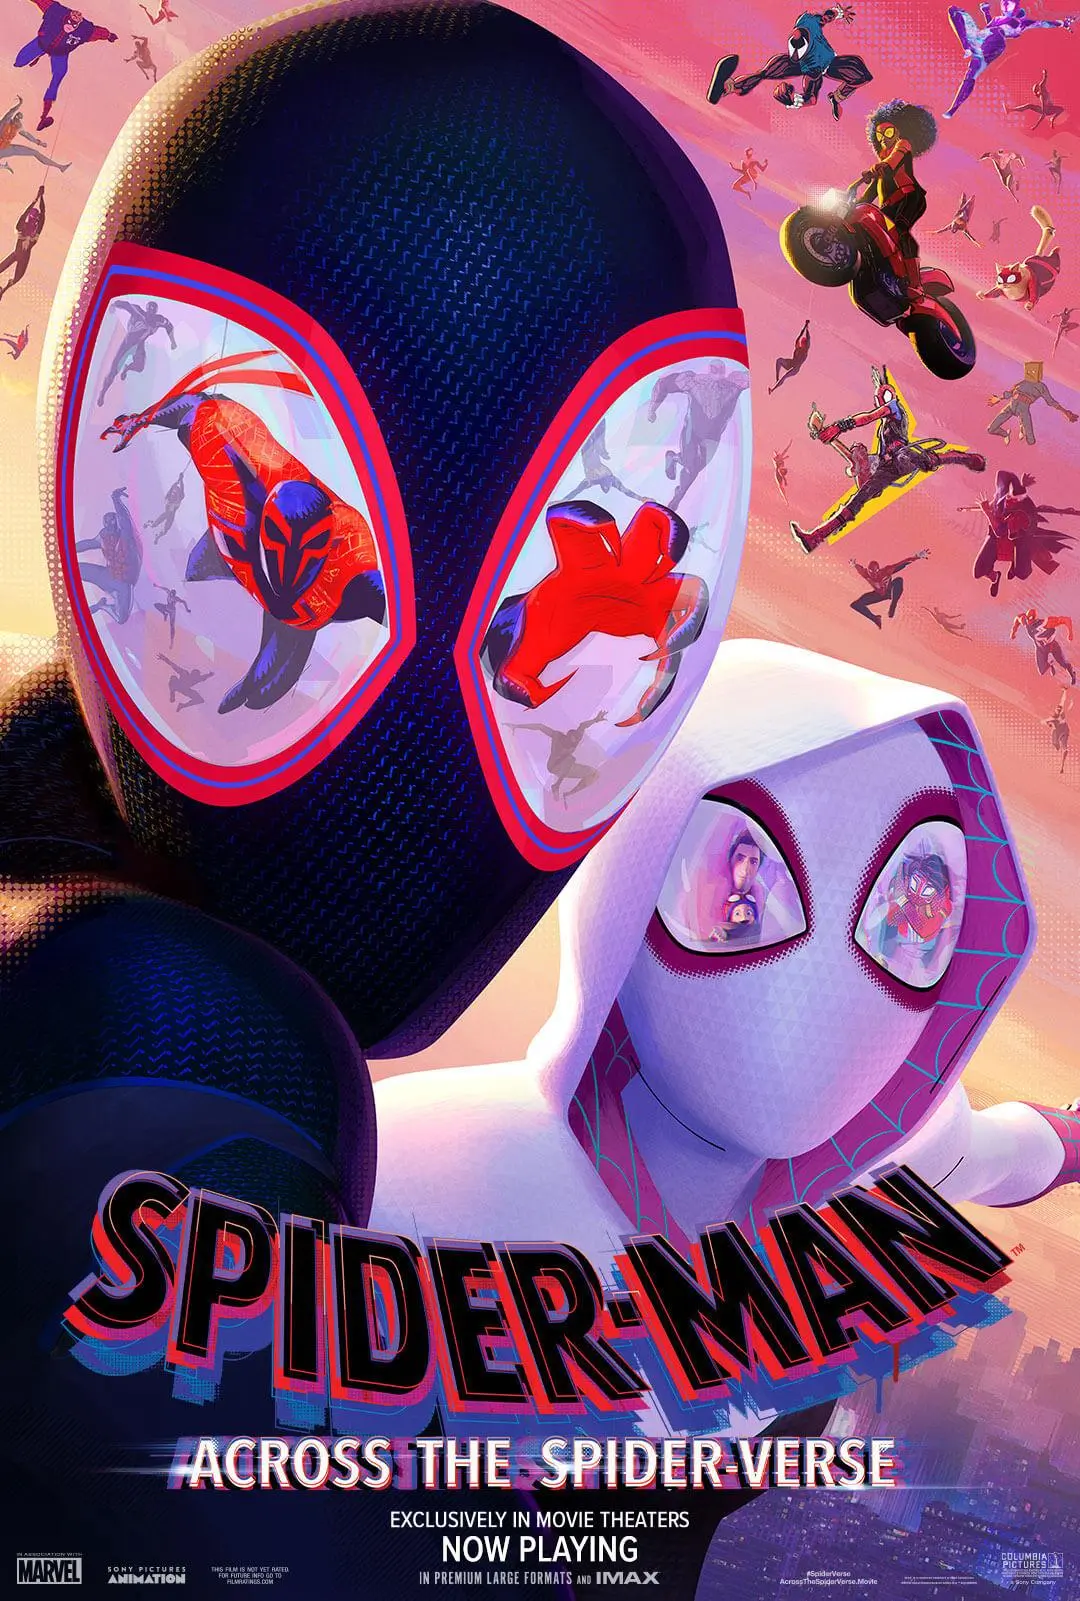 Spider-Man: Across the Spider-Verse – An Exciting Sequel to the Beloved Animated Film